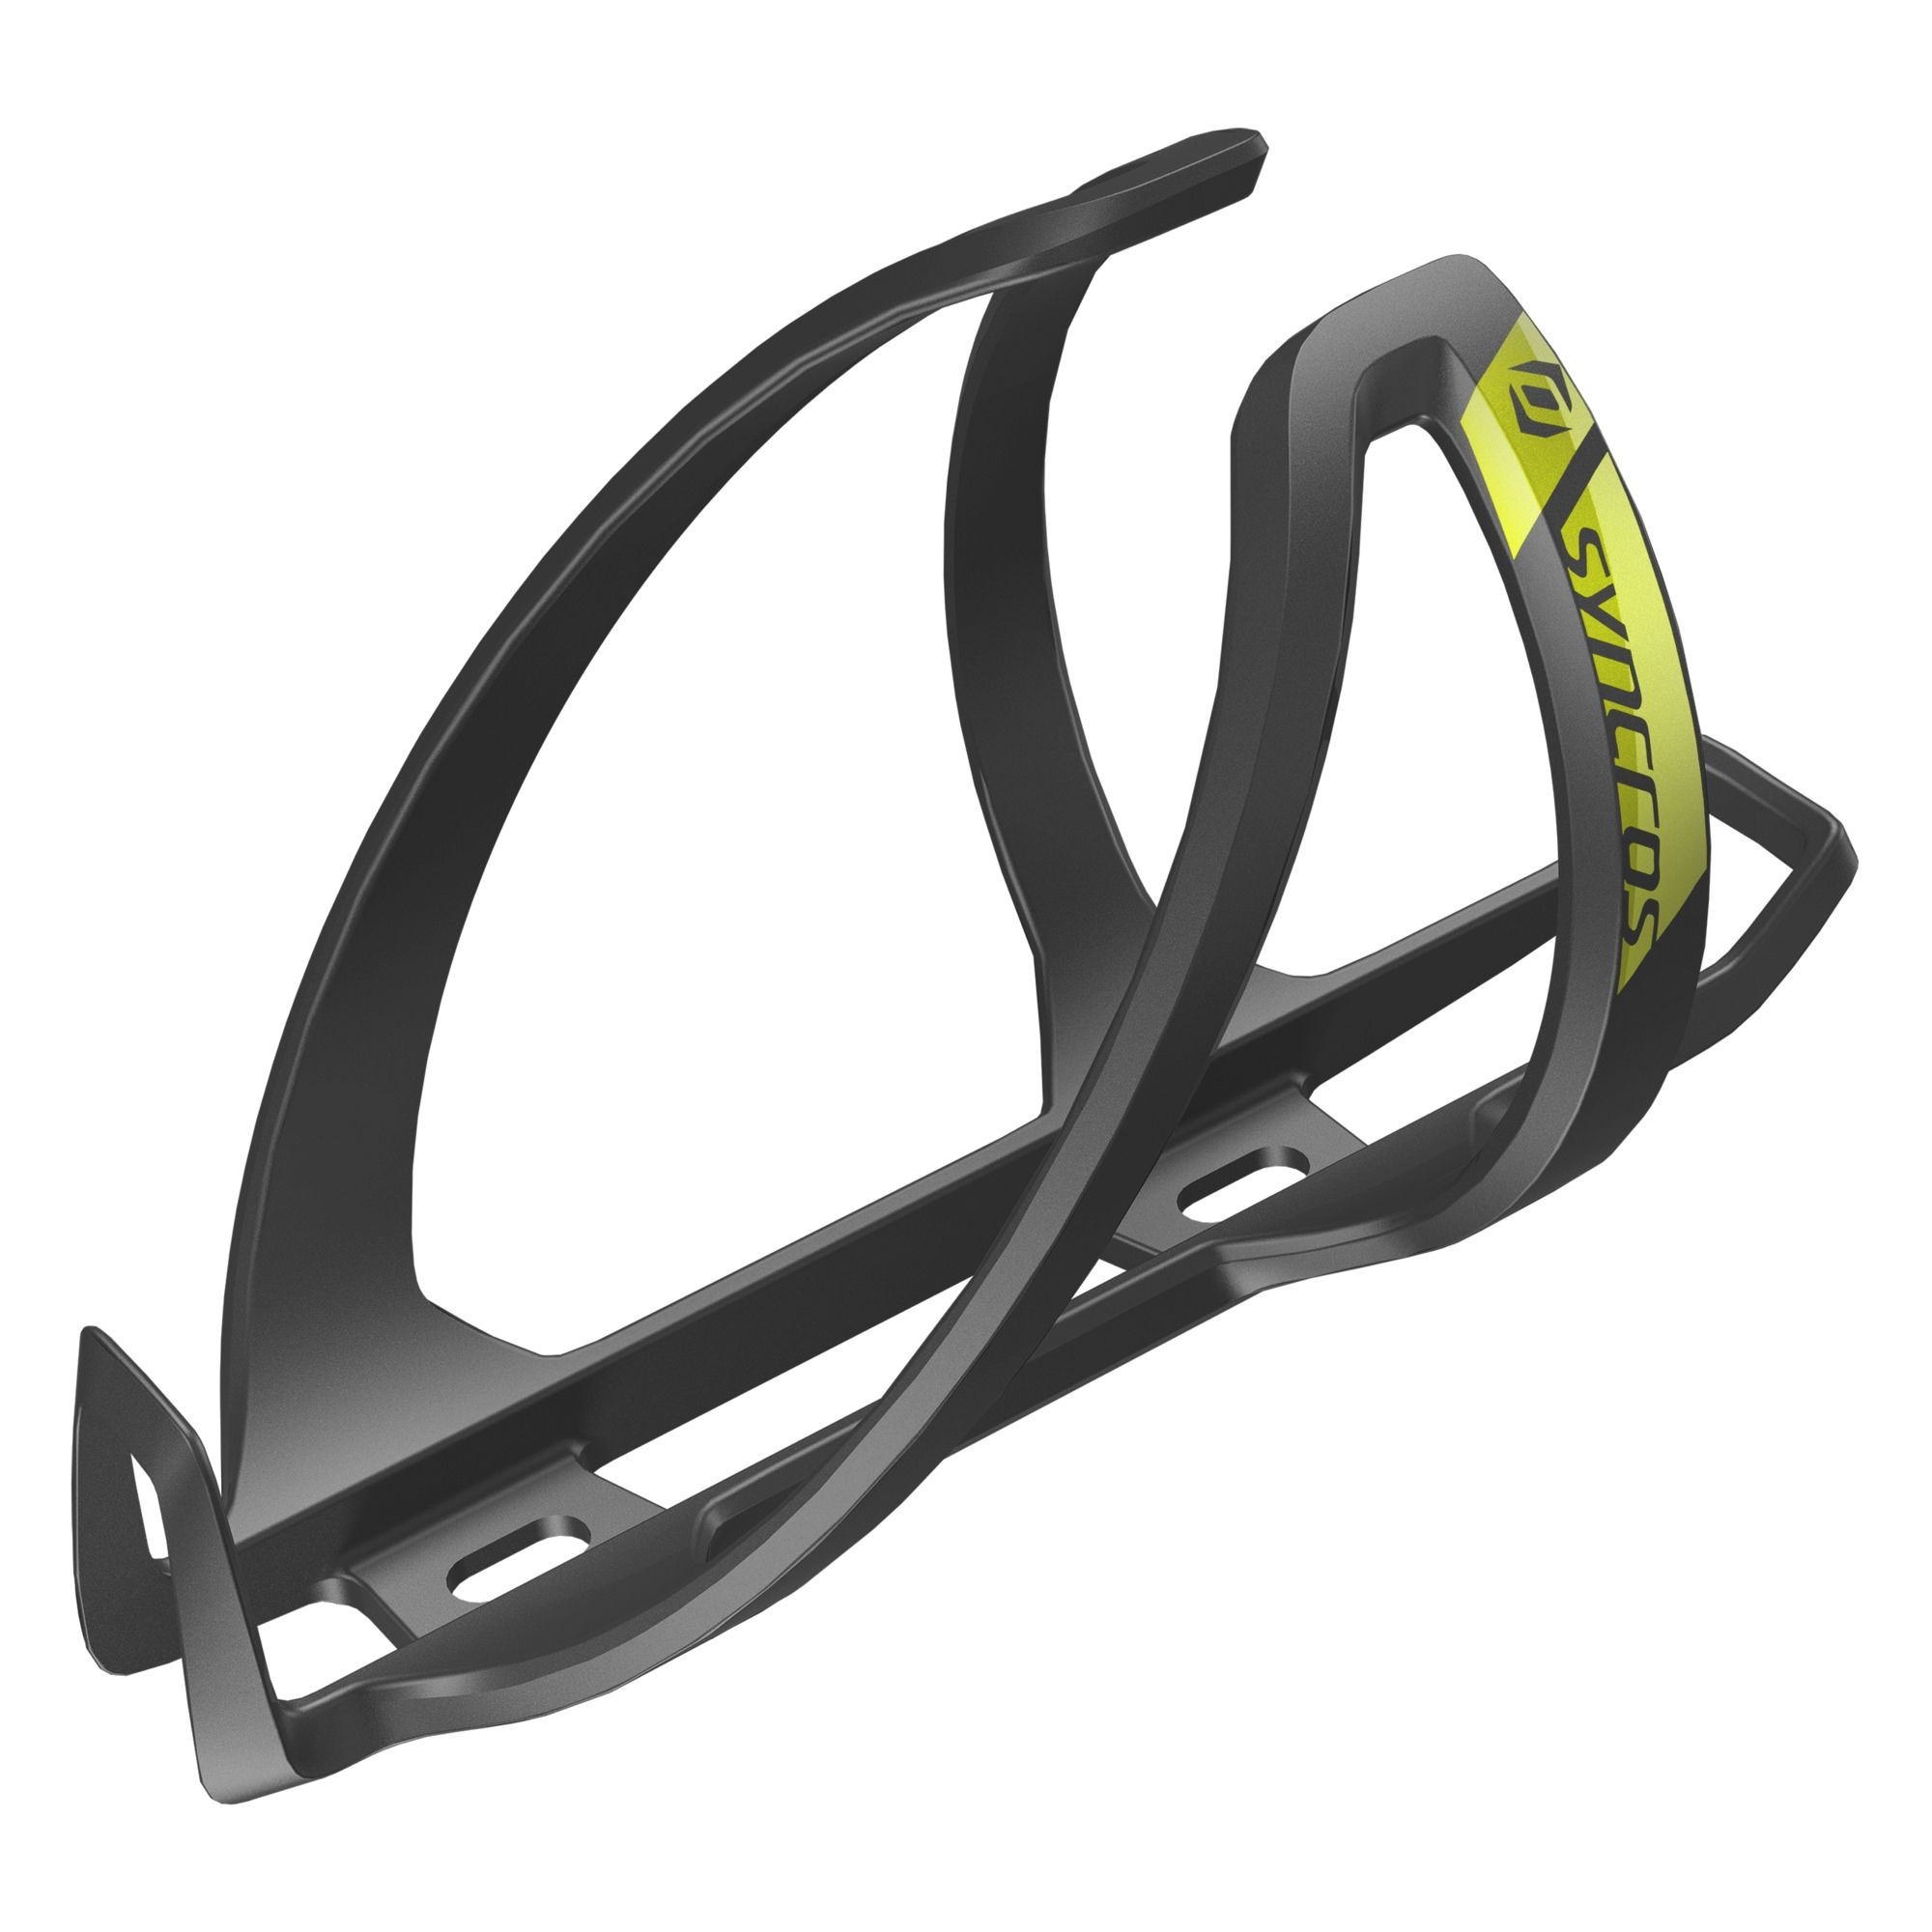 Syncros SYN Bottle cage coupe cage 2.0 Svart/gul 